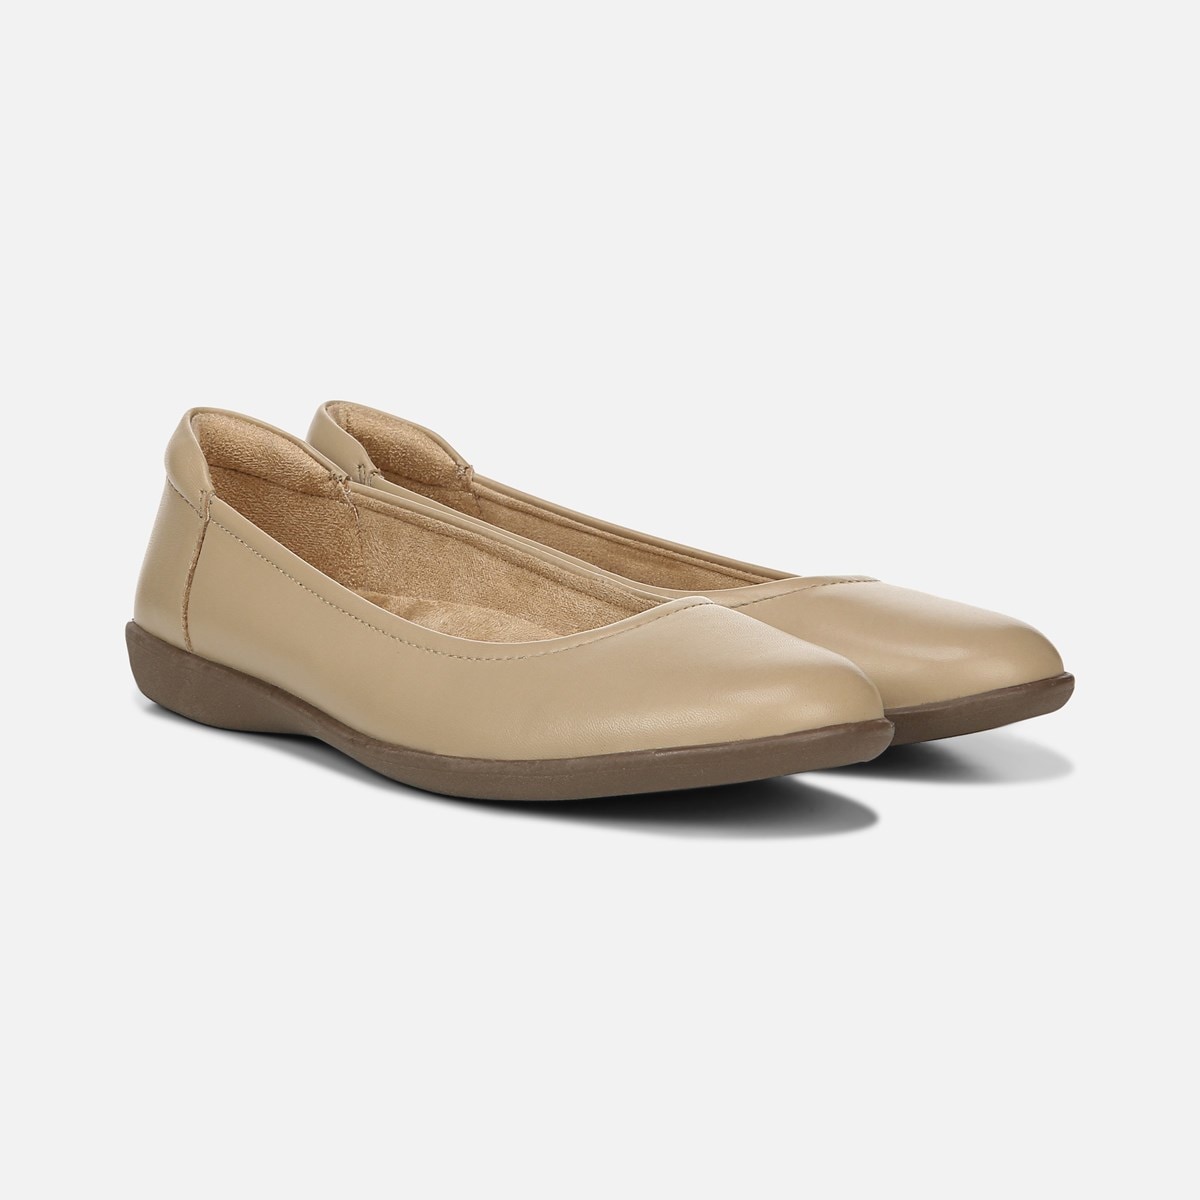 Naturalizer Flexy in Nude Leather Flats 